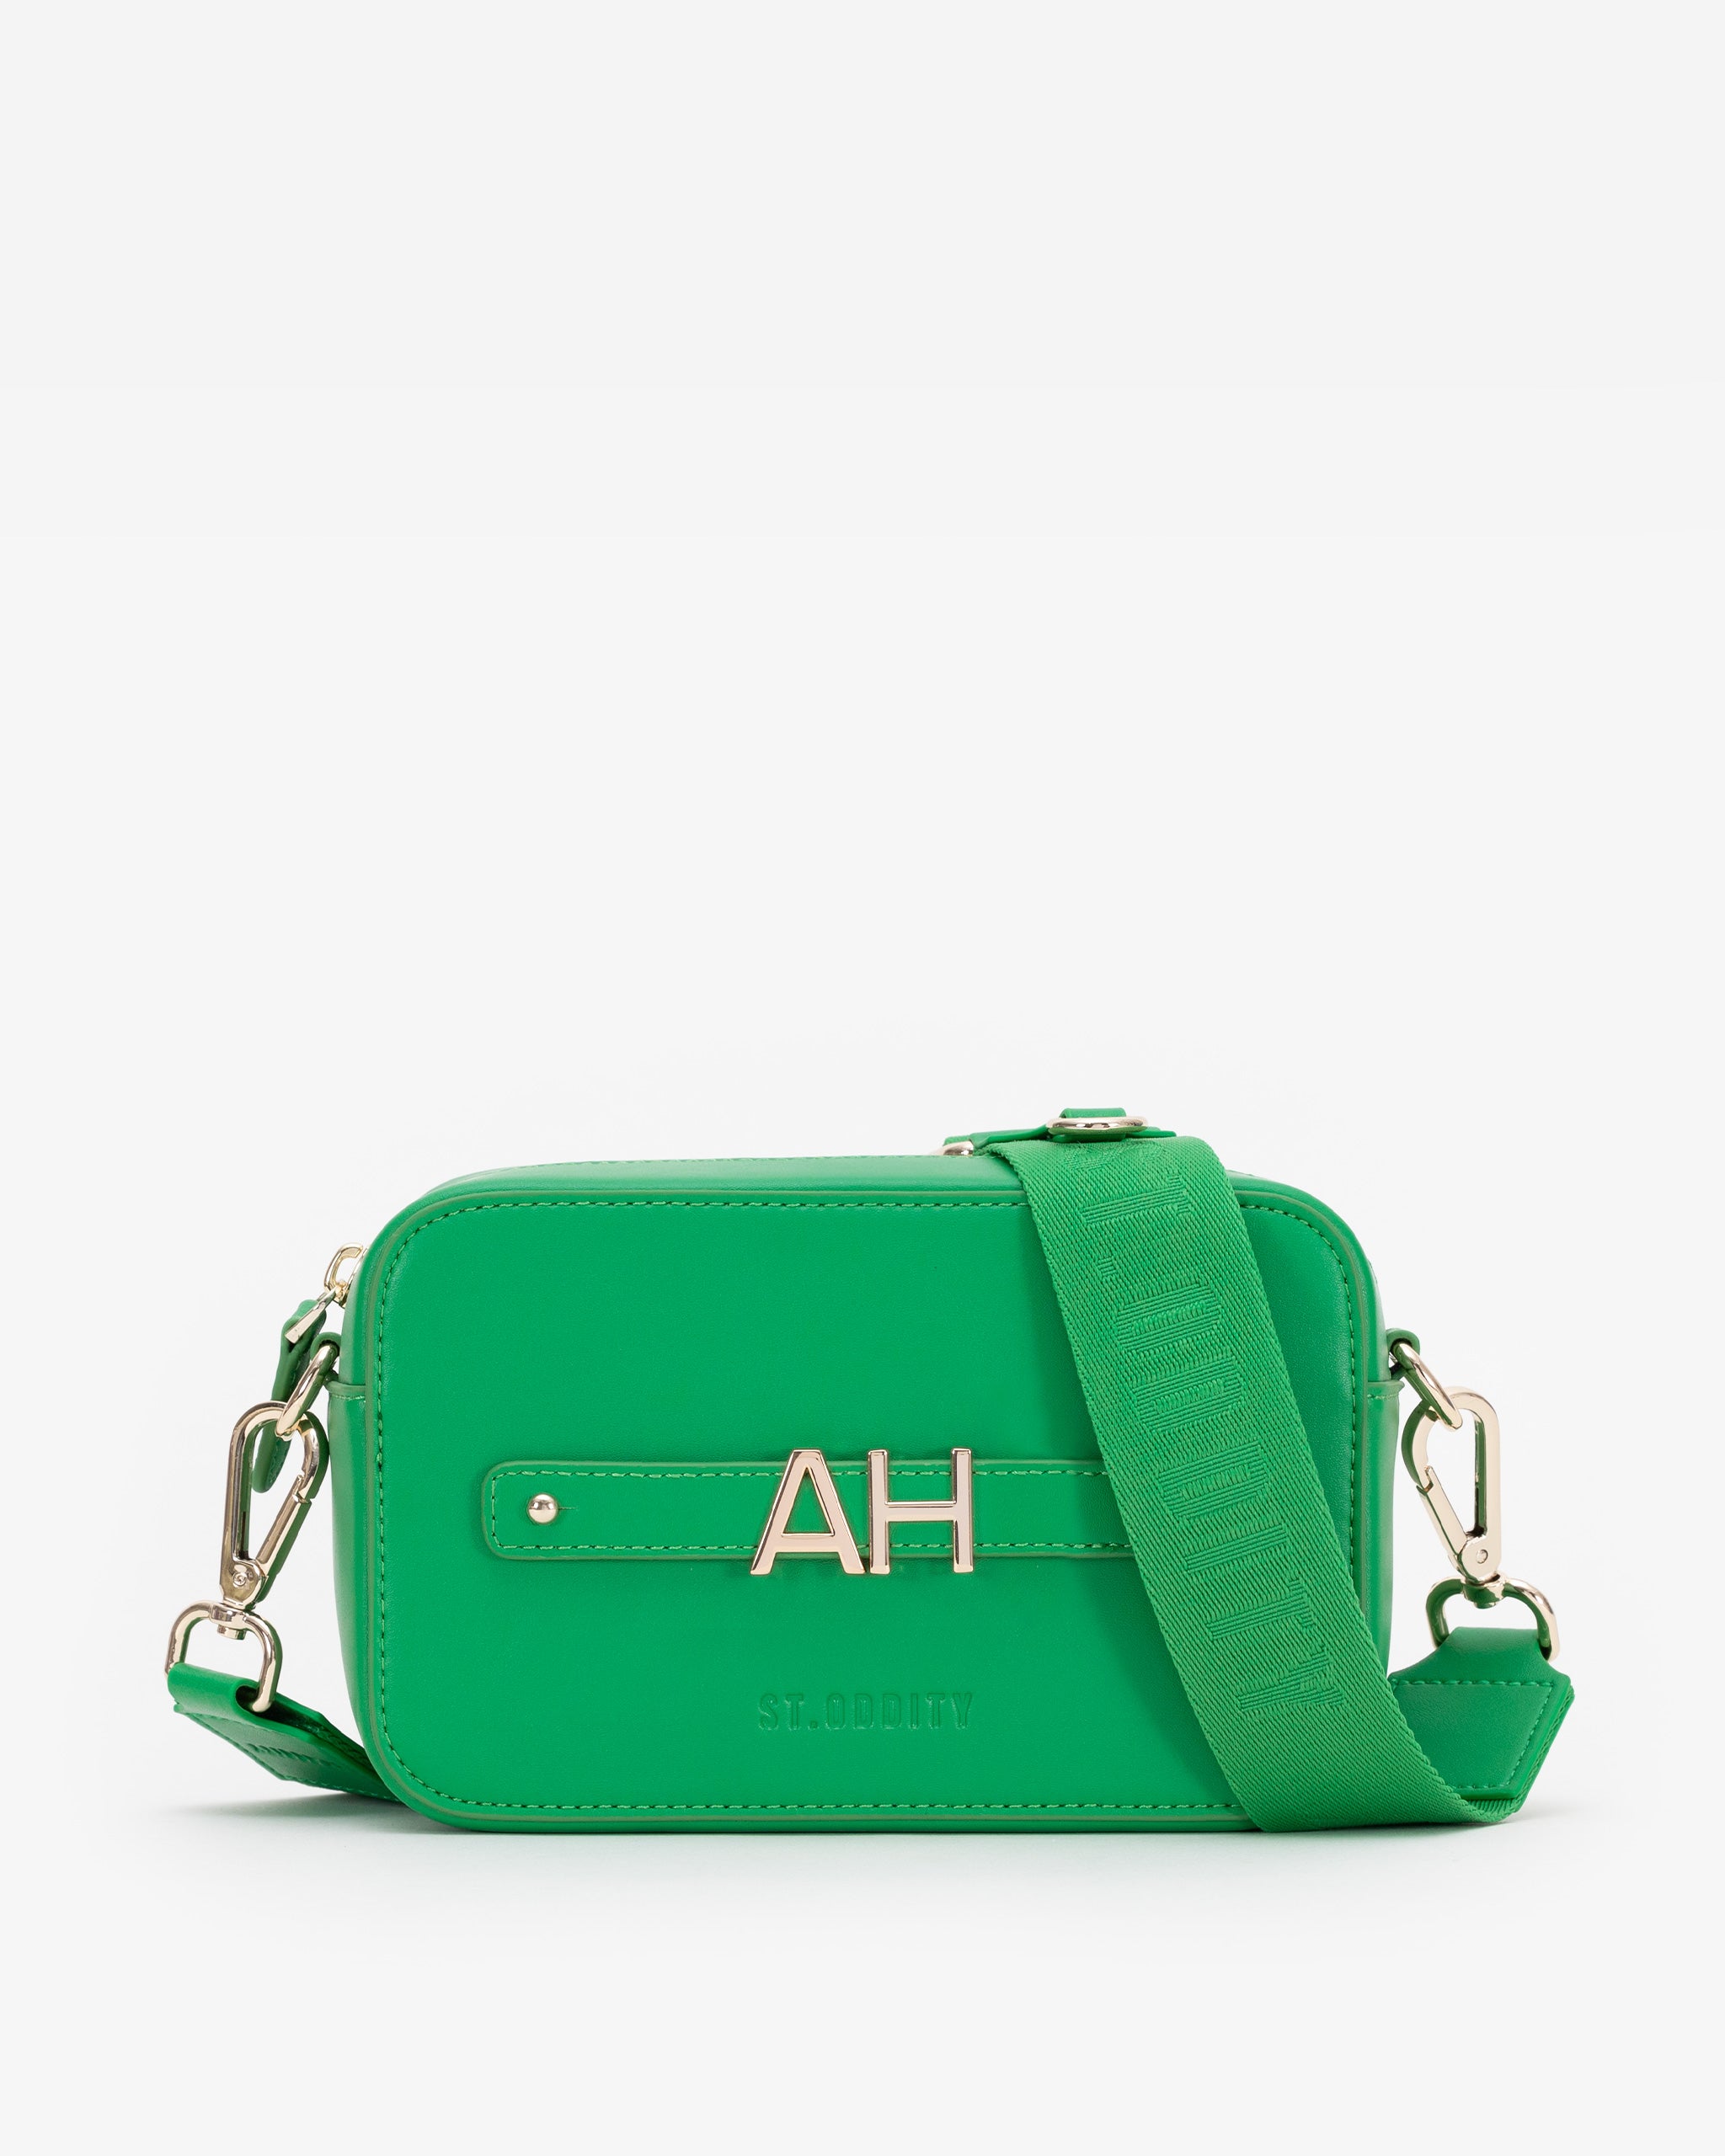 Zip Crossbody Bag in Grass Green with Personalised Hardware